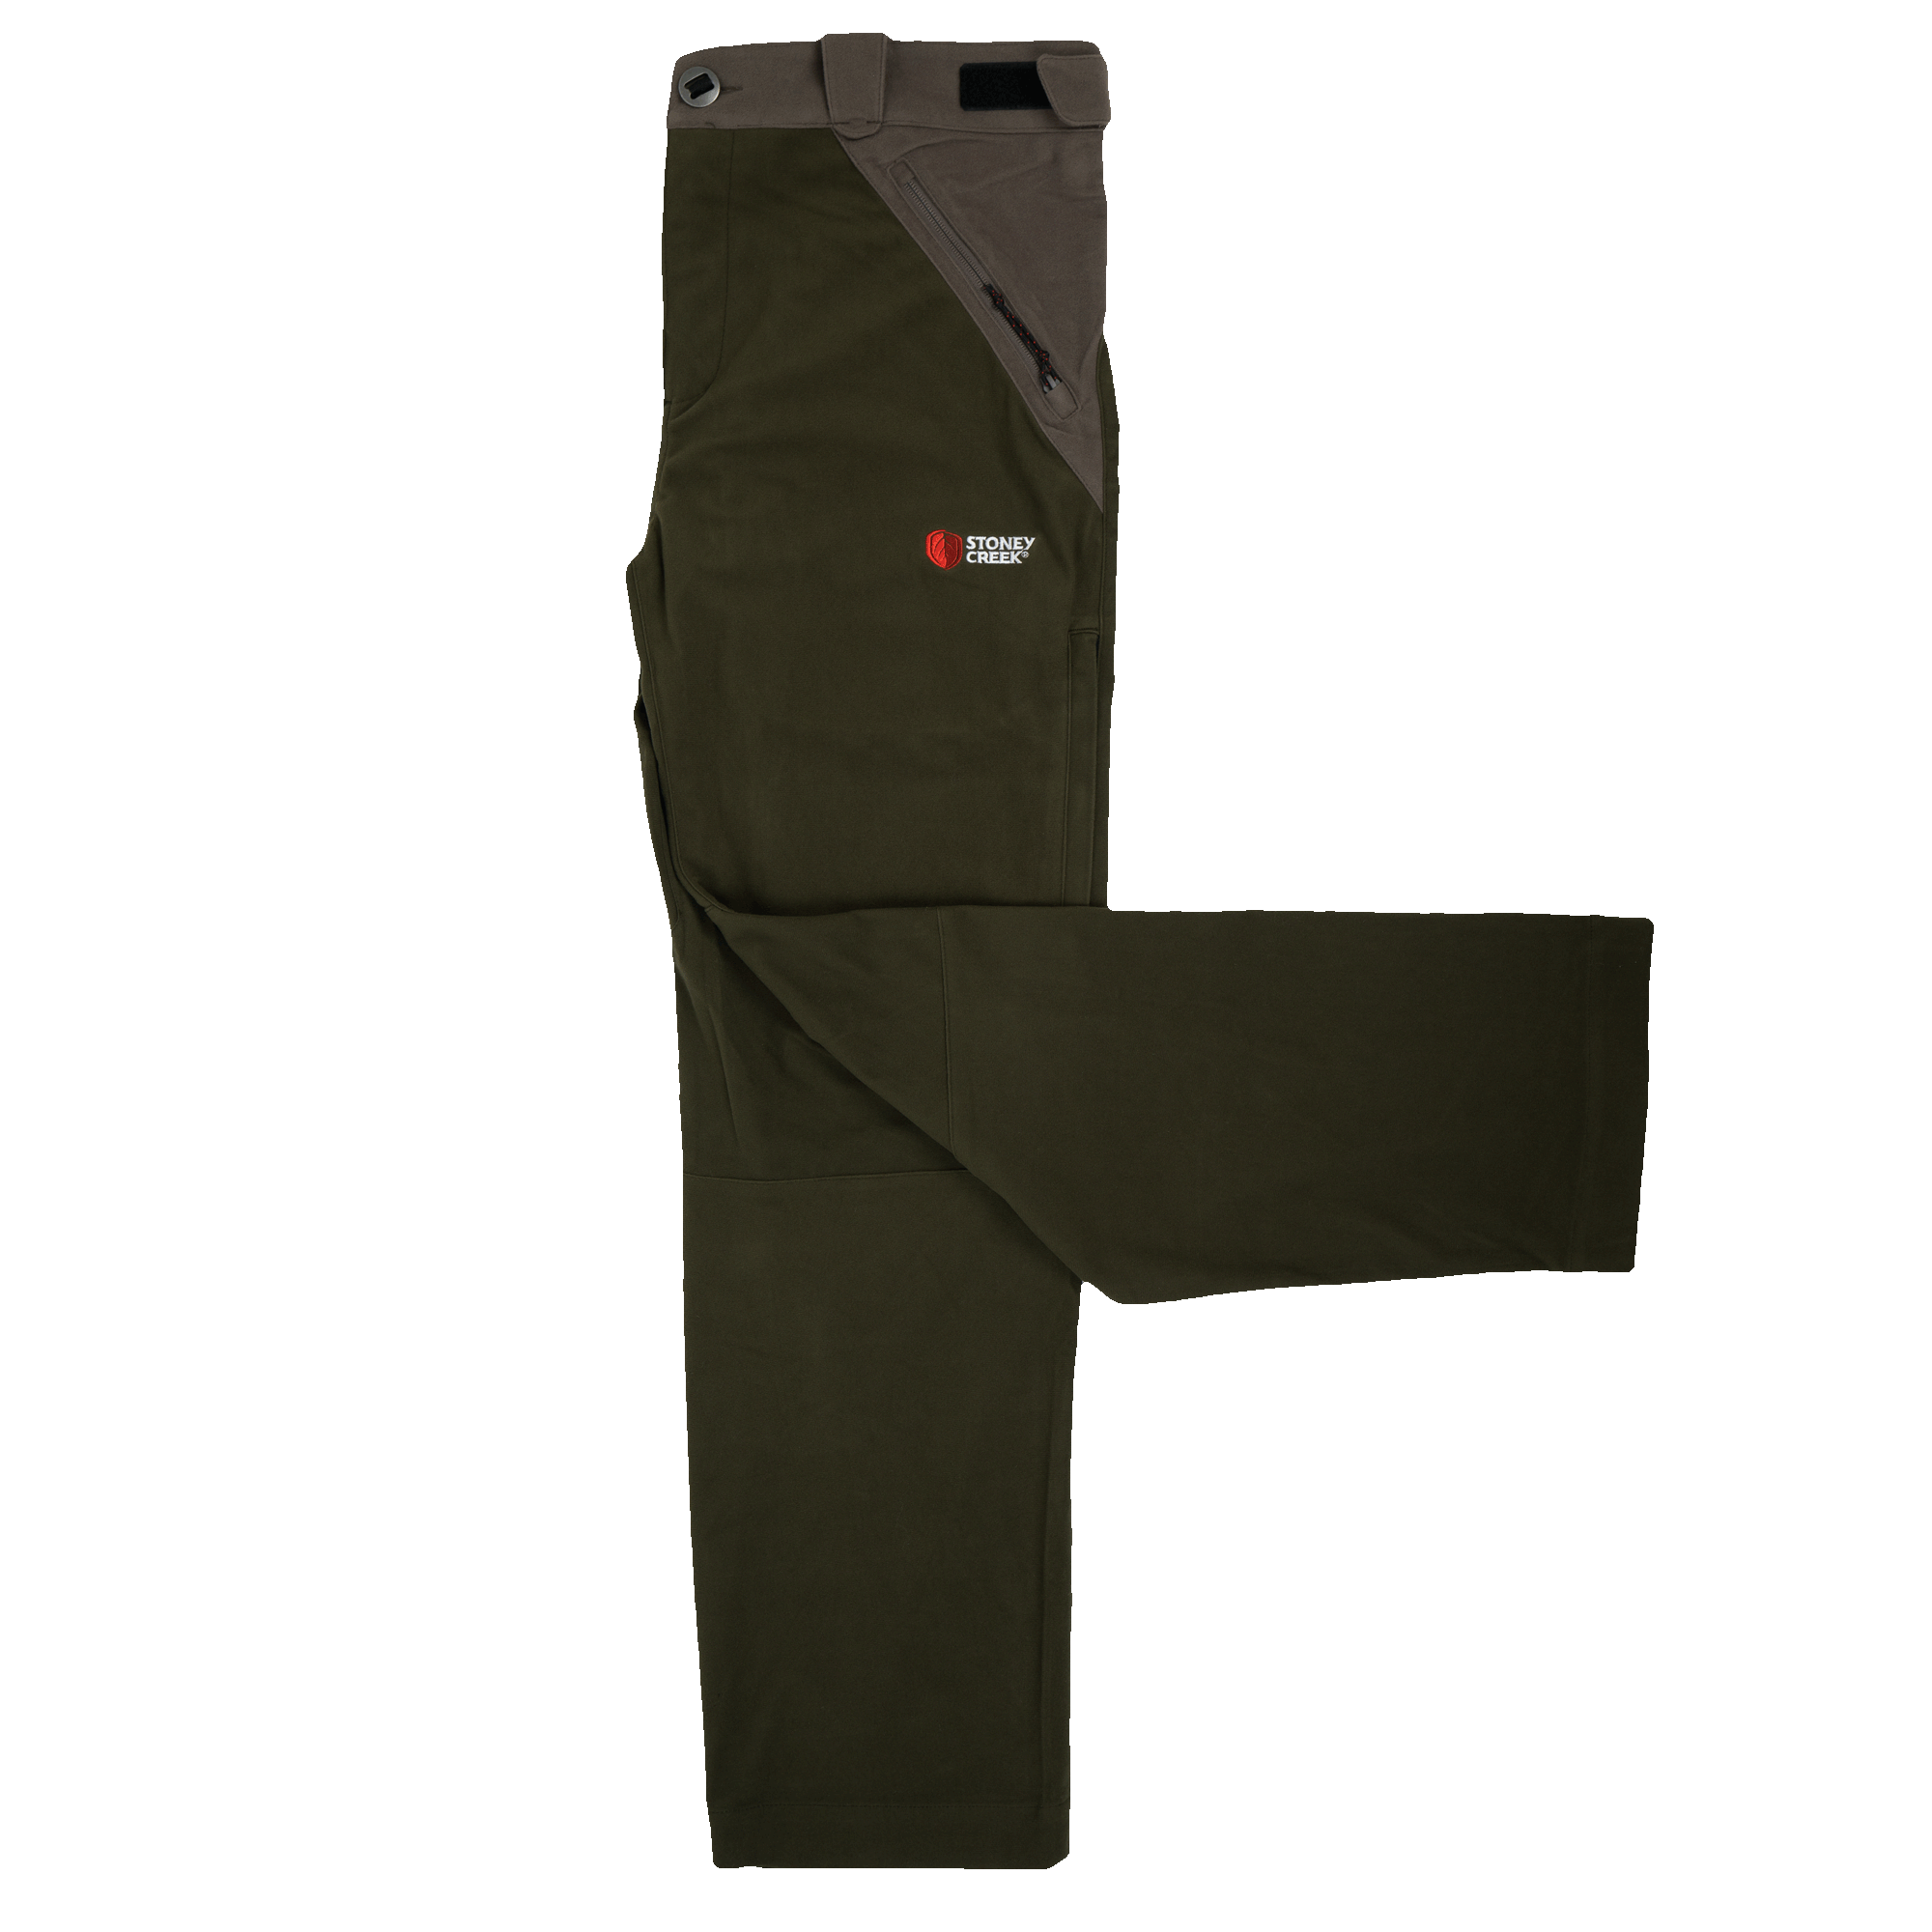 Stoney Creek Microtough Trousers - Wander Outdoors